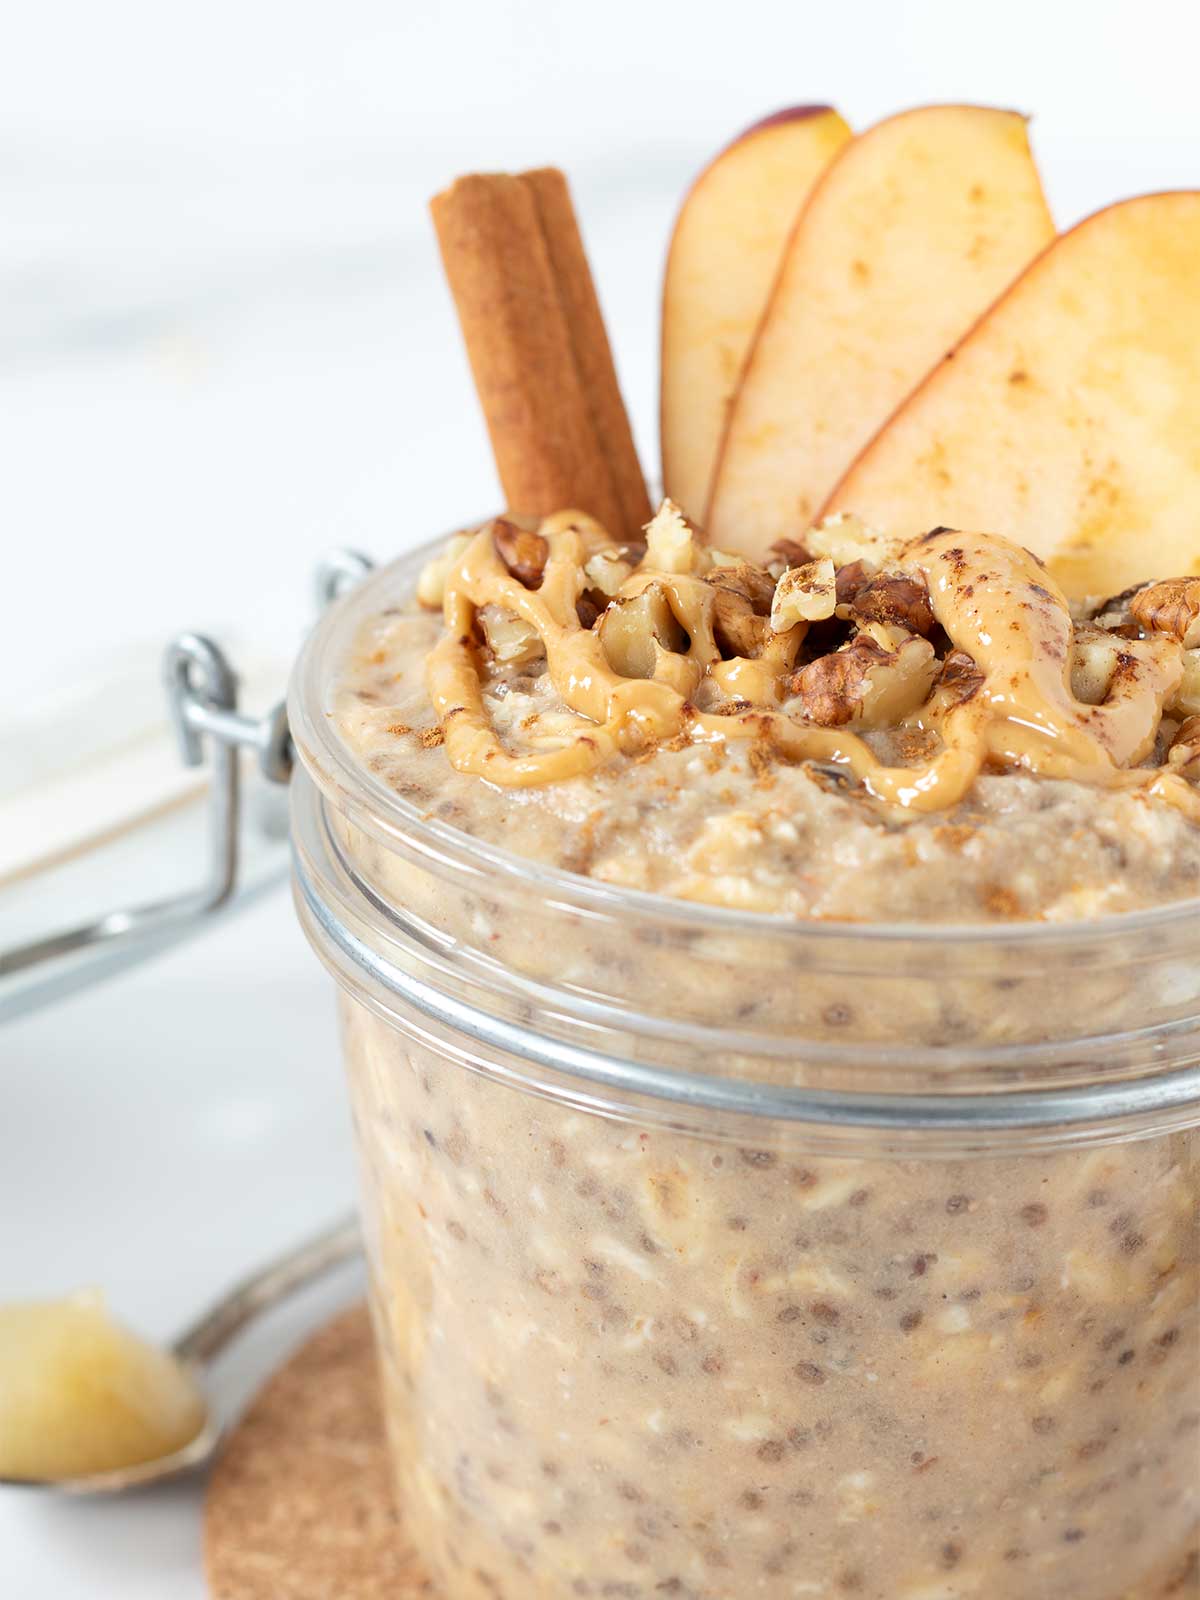 Applesauce overnight oats with cinnamon and peanut butter for breakfast.